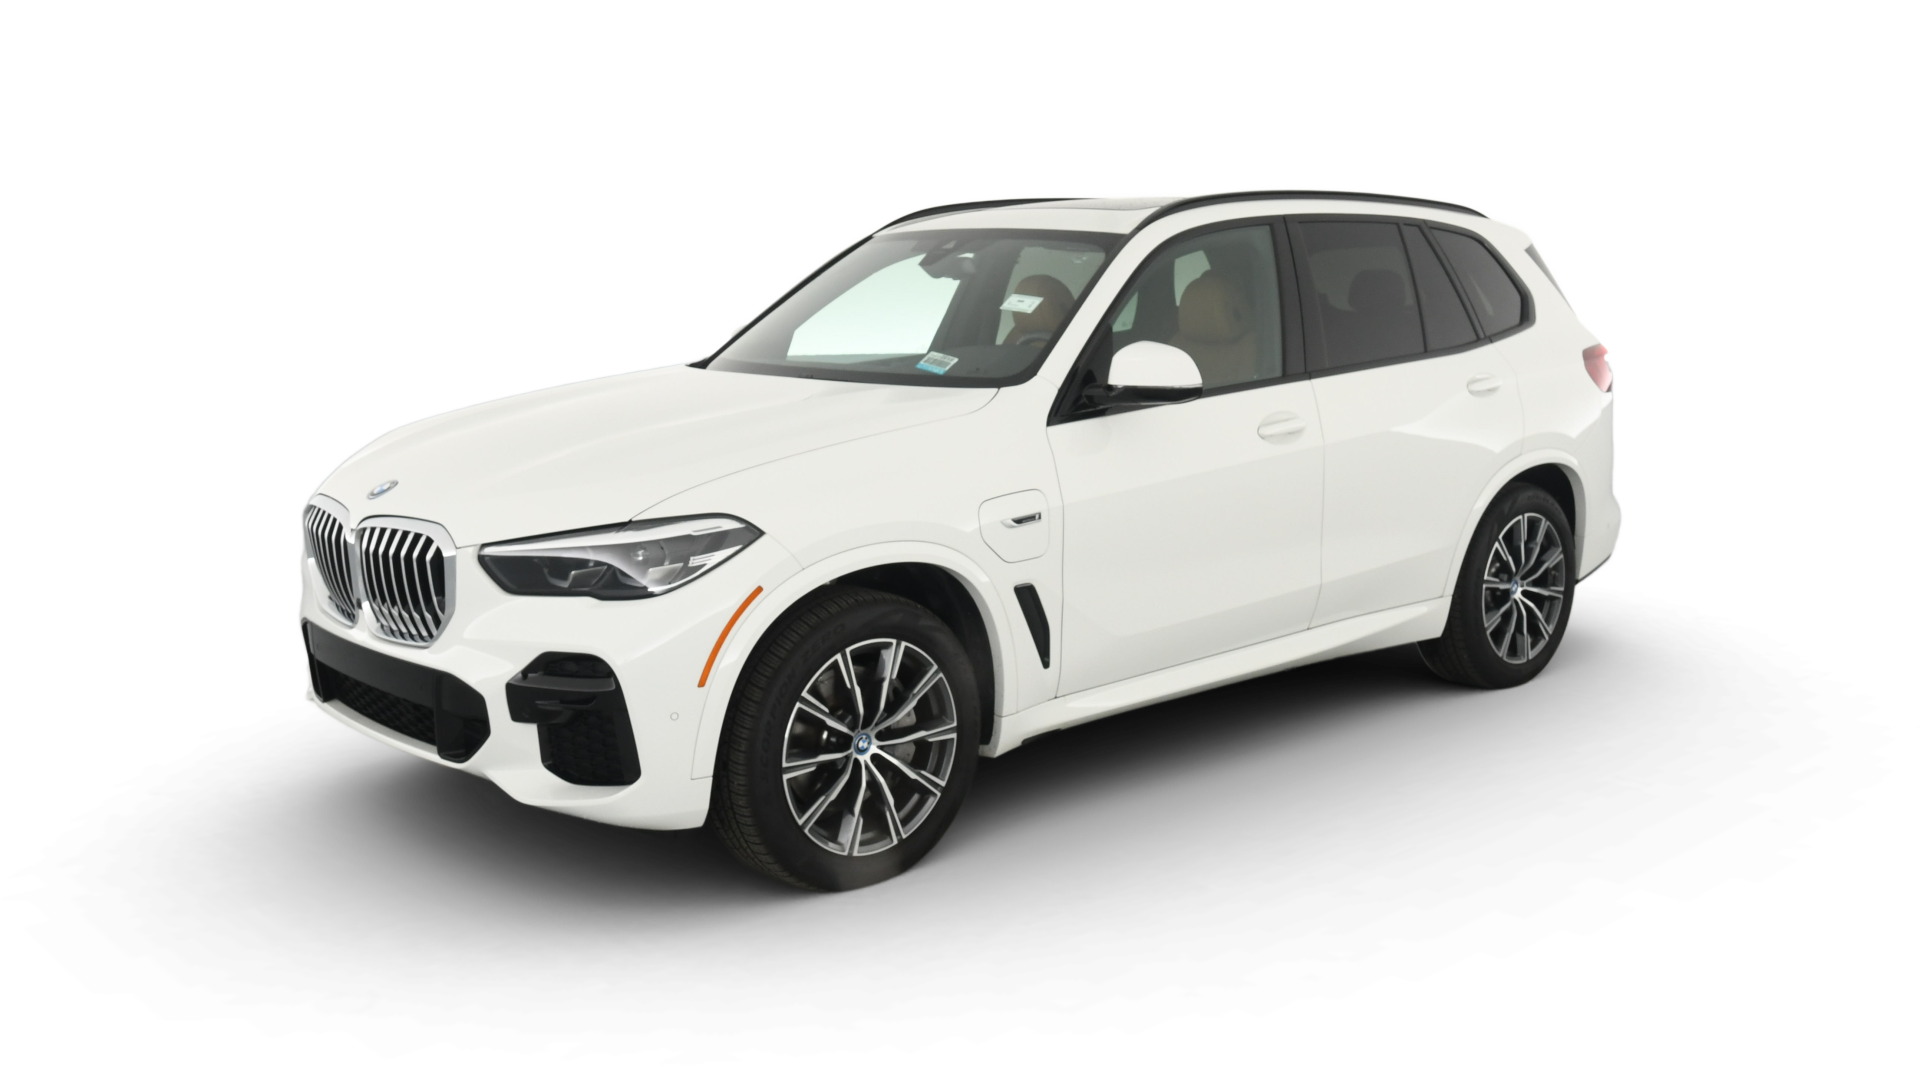 Used BMW X5 for Sale Online